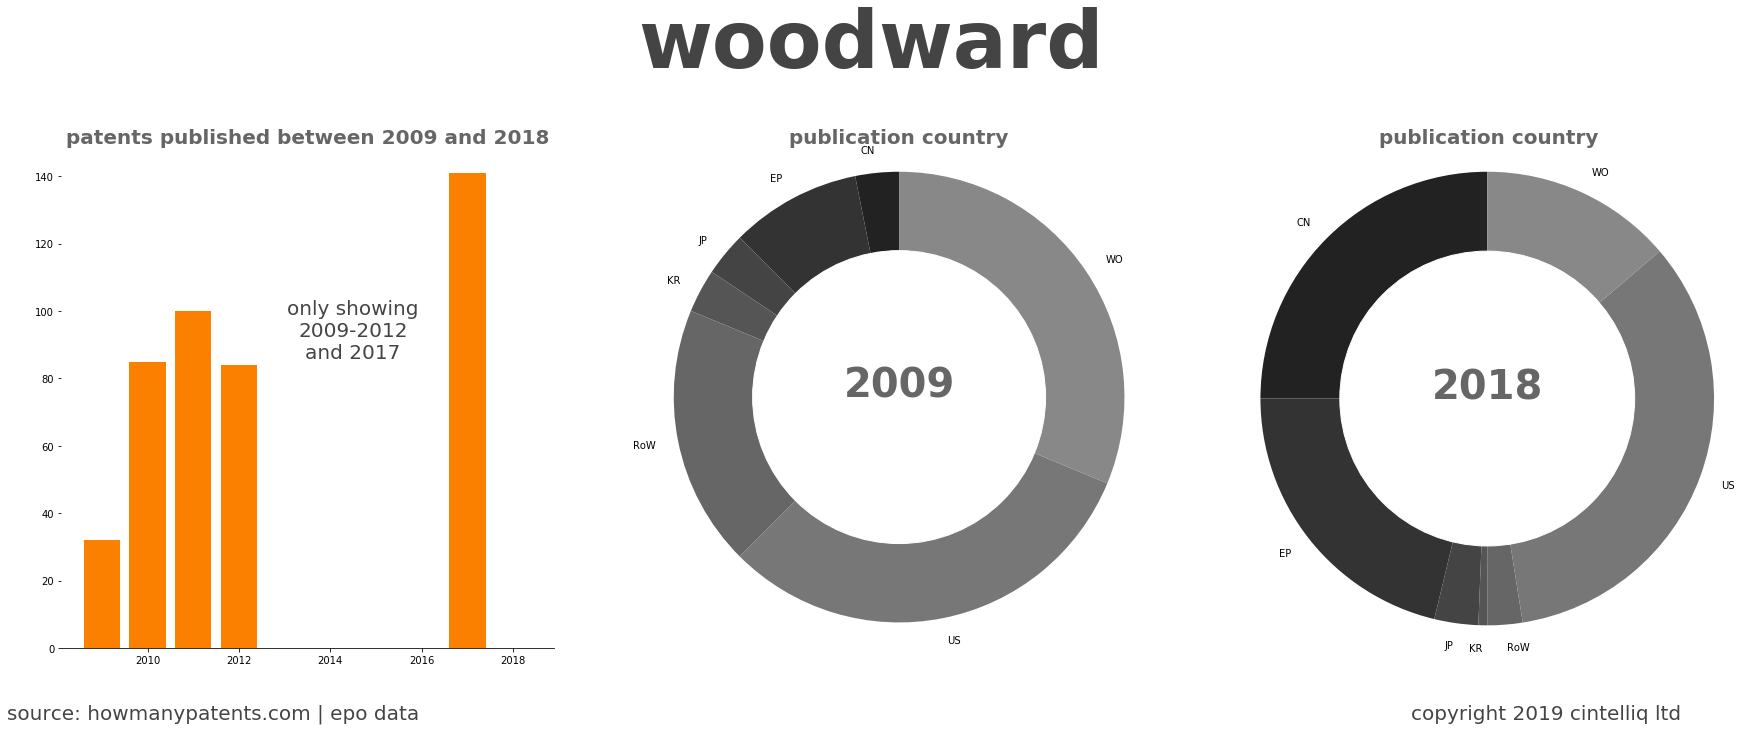 summary of patents for Woodward